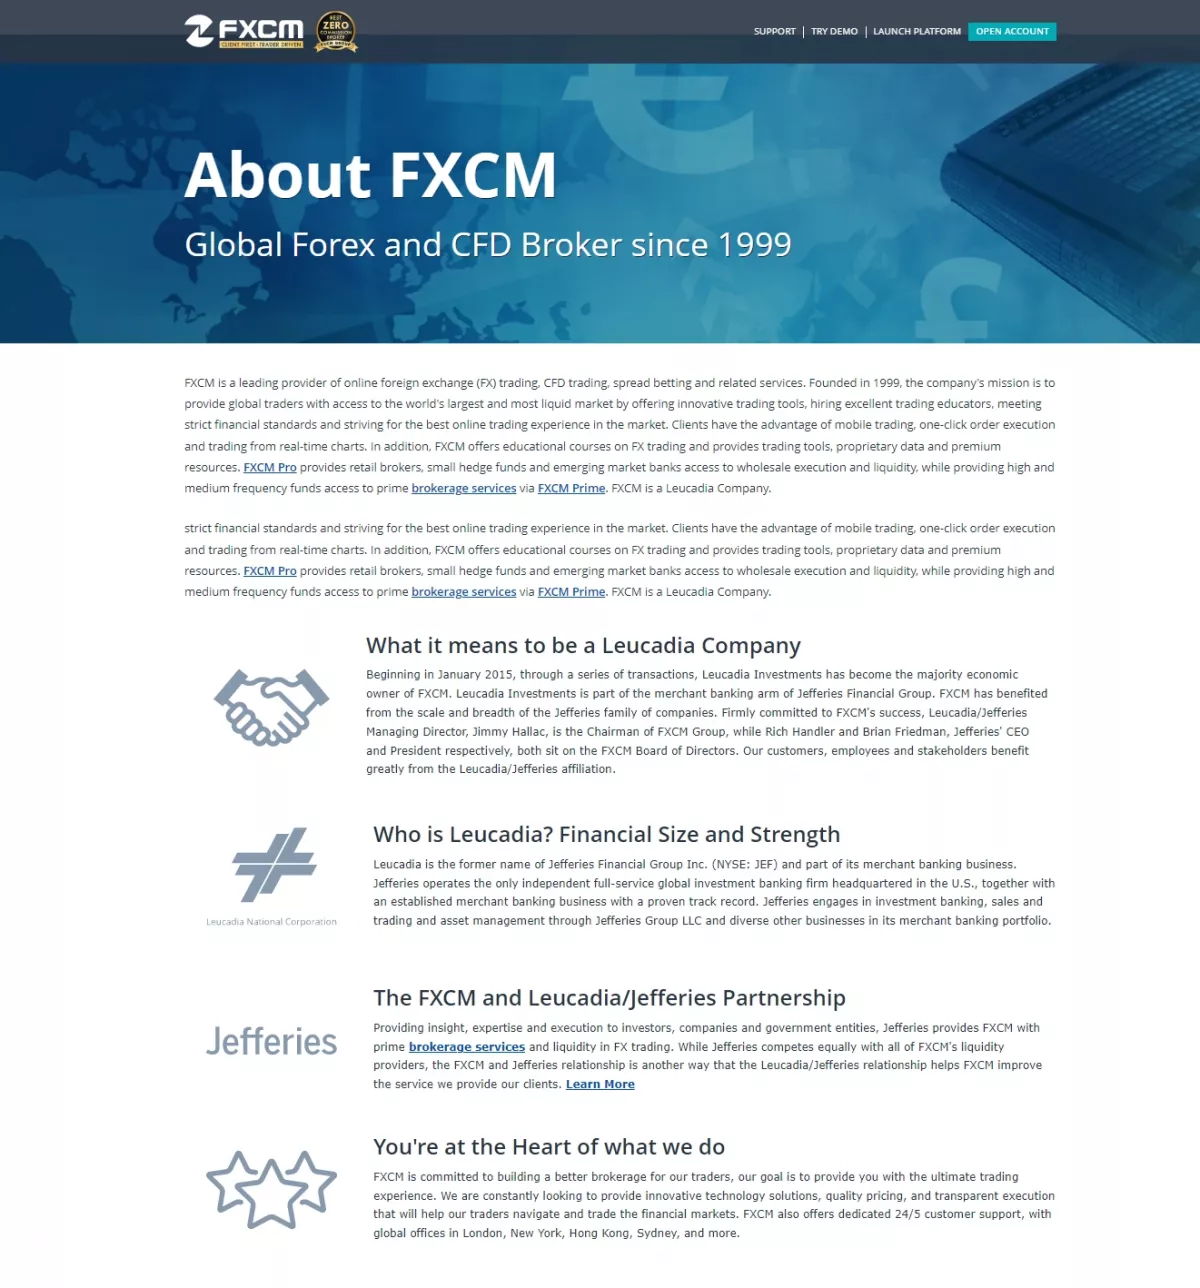 Who is FXCM and what does it offer to traders around the world